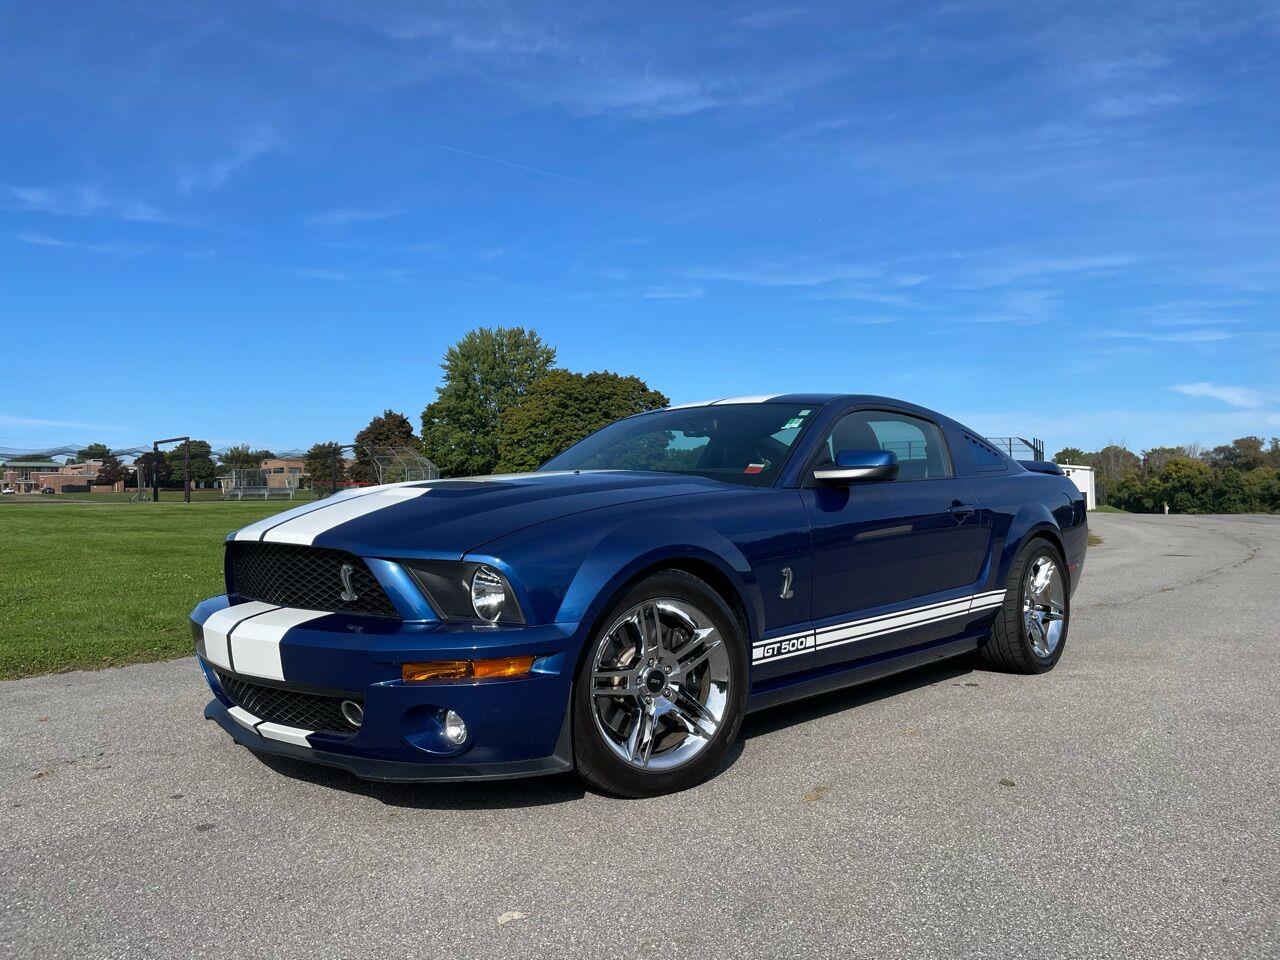 For Sale: 2007 Shelby GT500 in Hilton, New York for sale in Hilton, NY